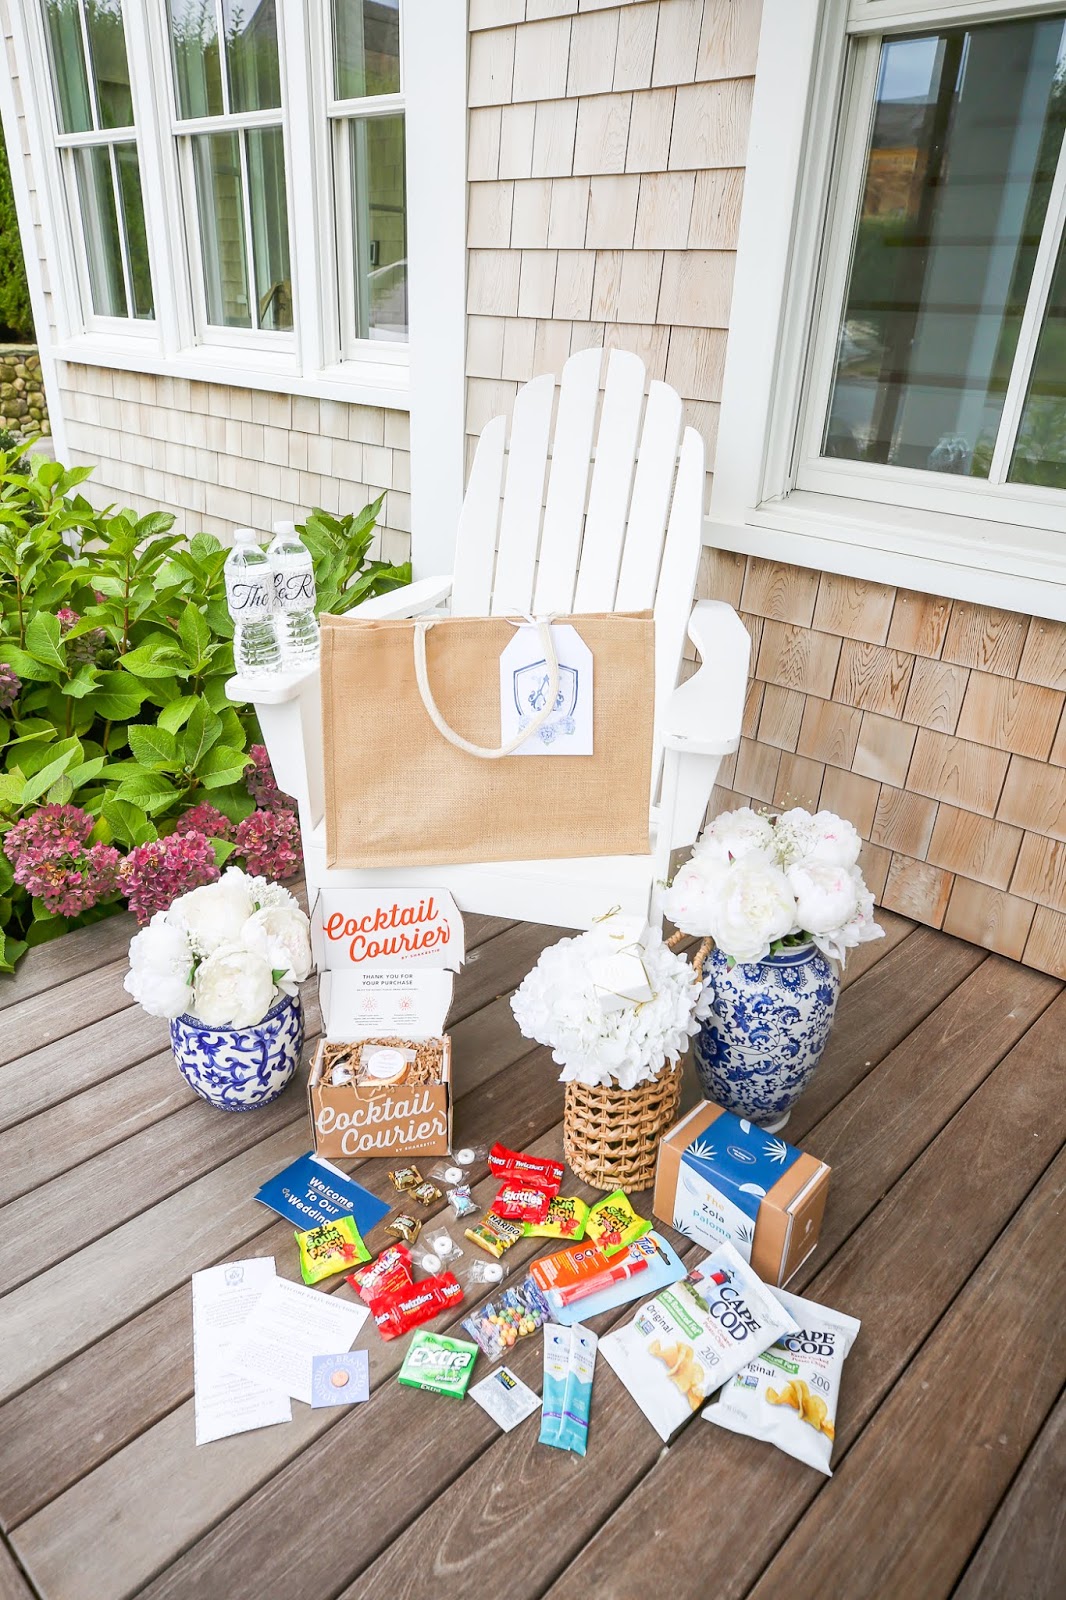 Our Welcome Bags, Connecticut Fashion and Lifestyle Blog